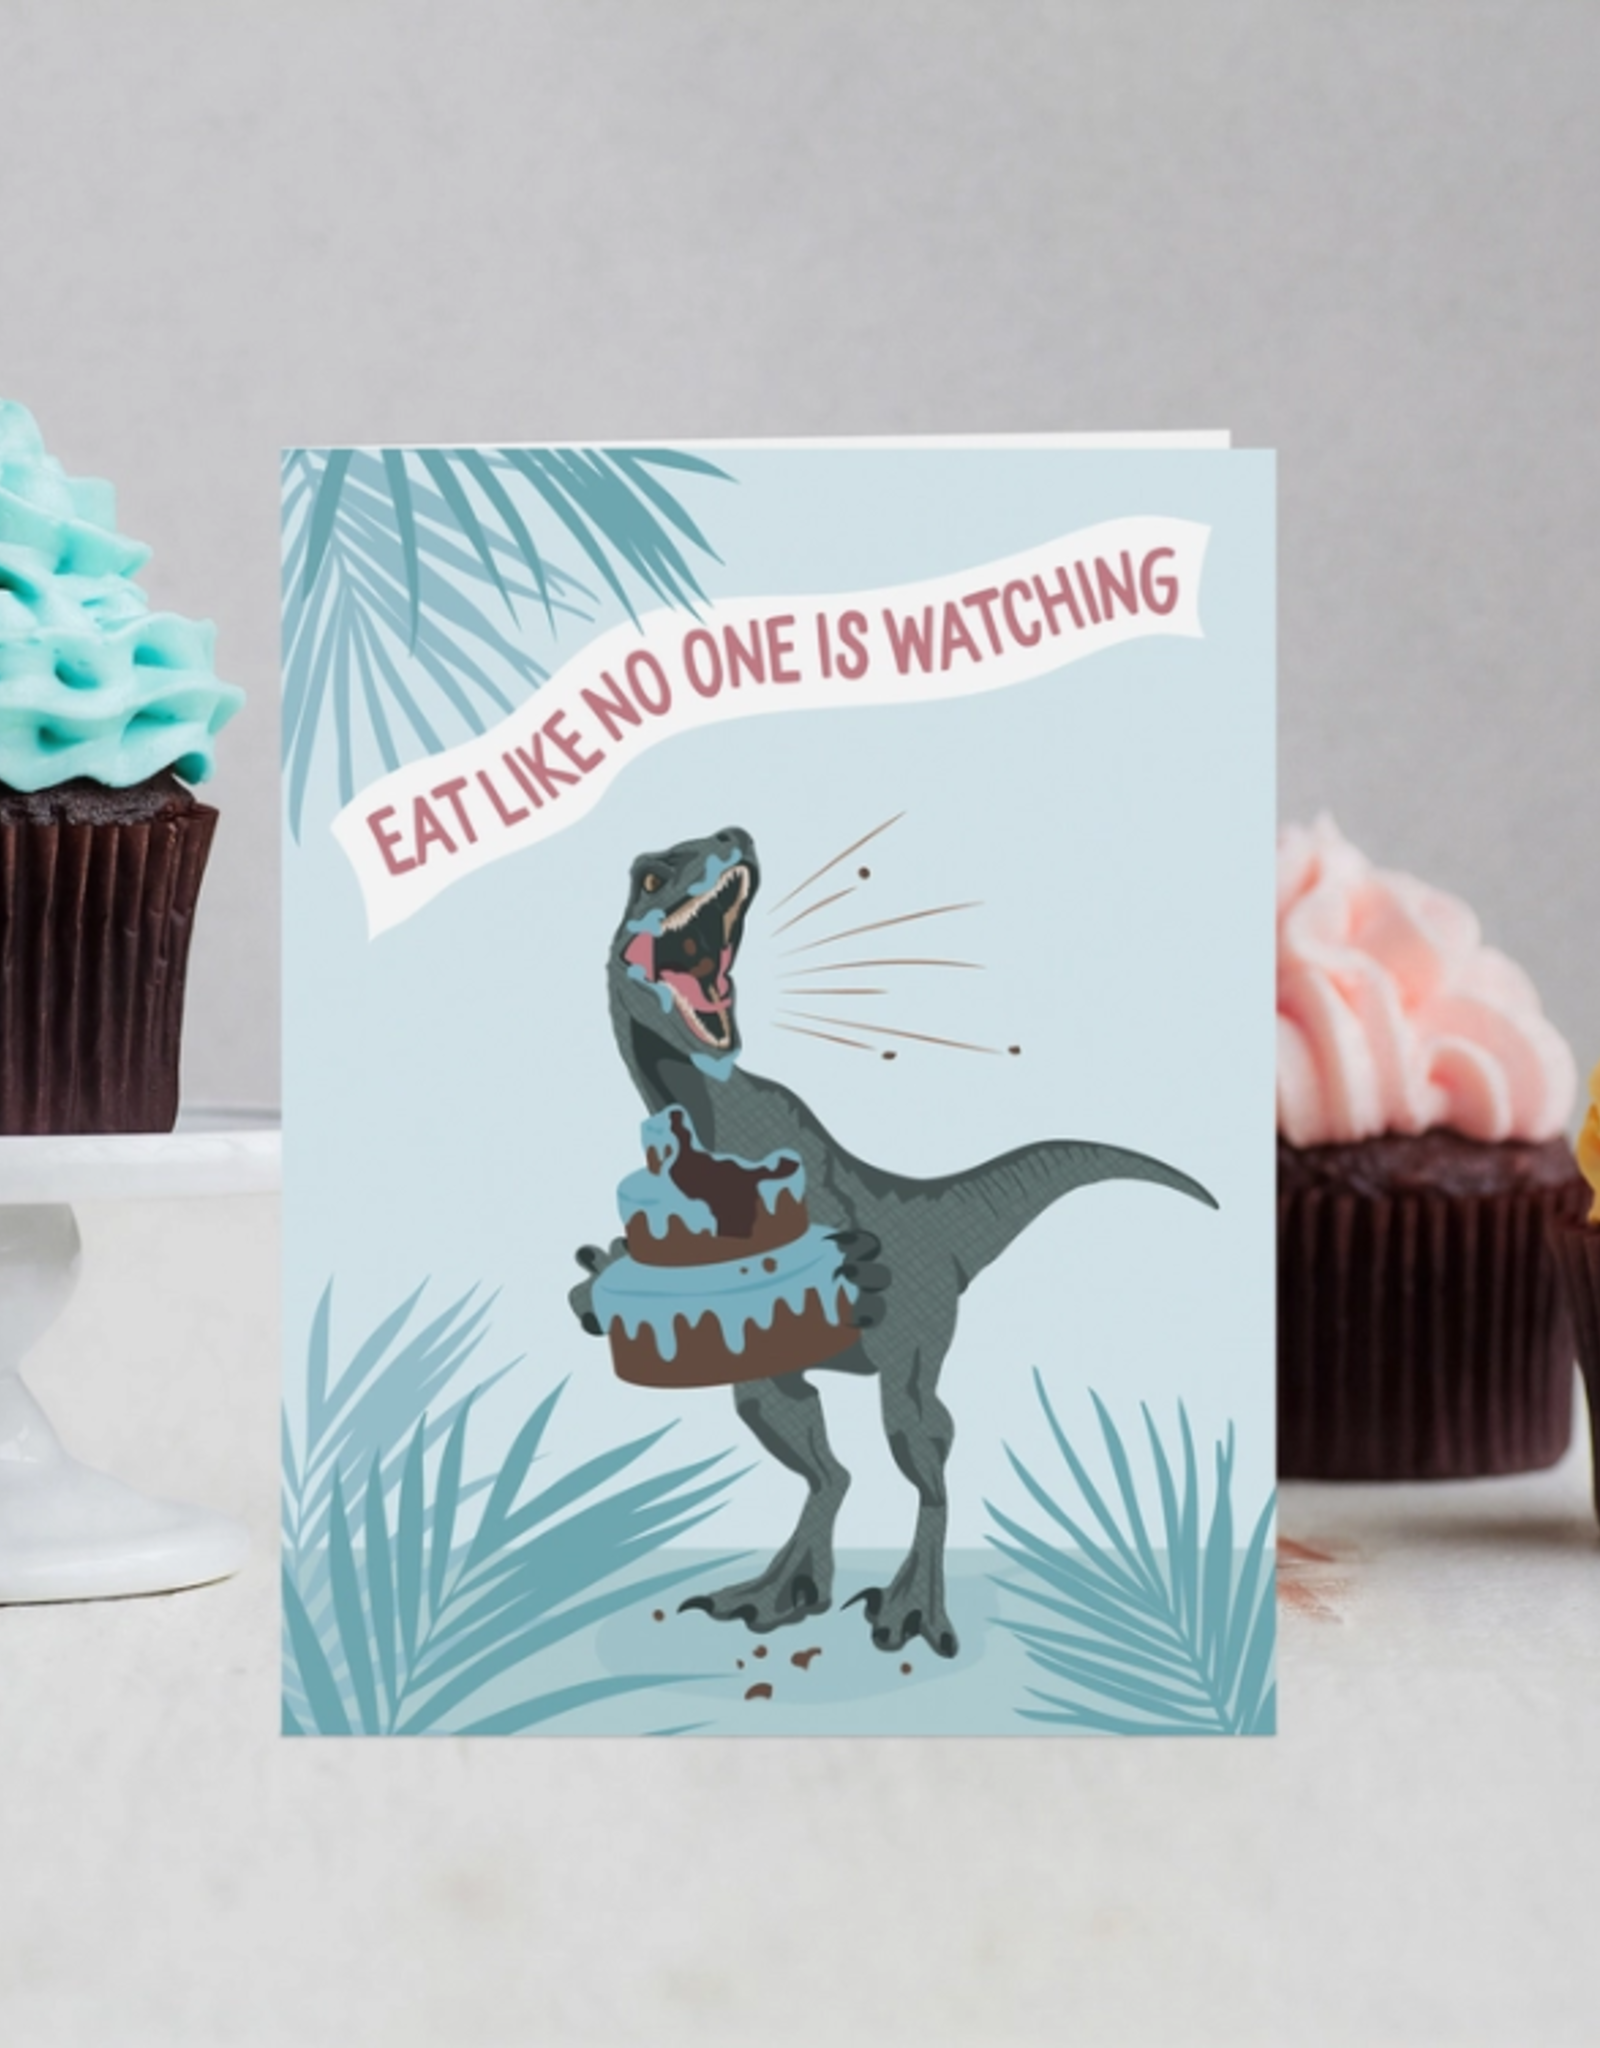 Modern Printed Matter Card - Birthday: Eat Like No One Is Watching